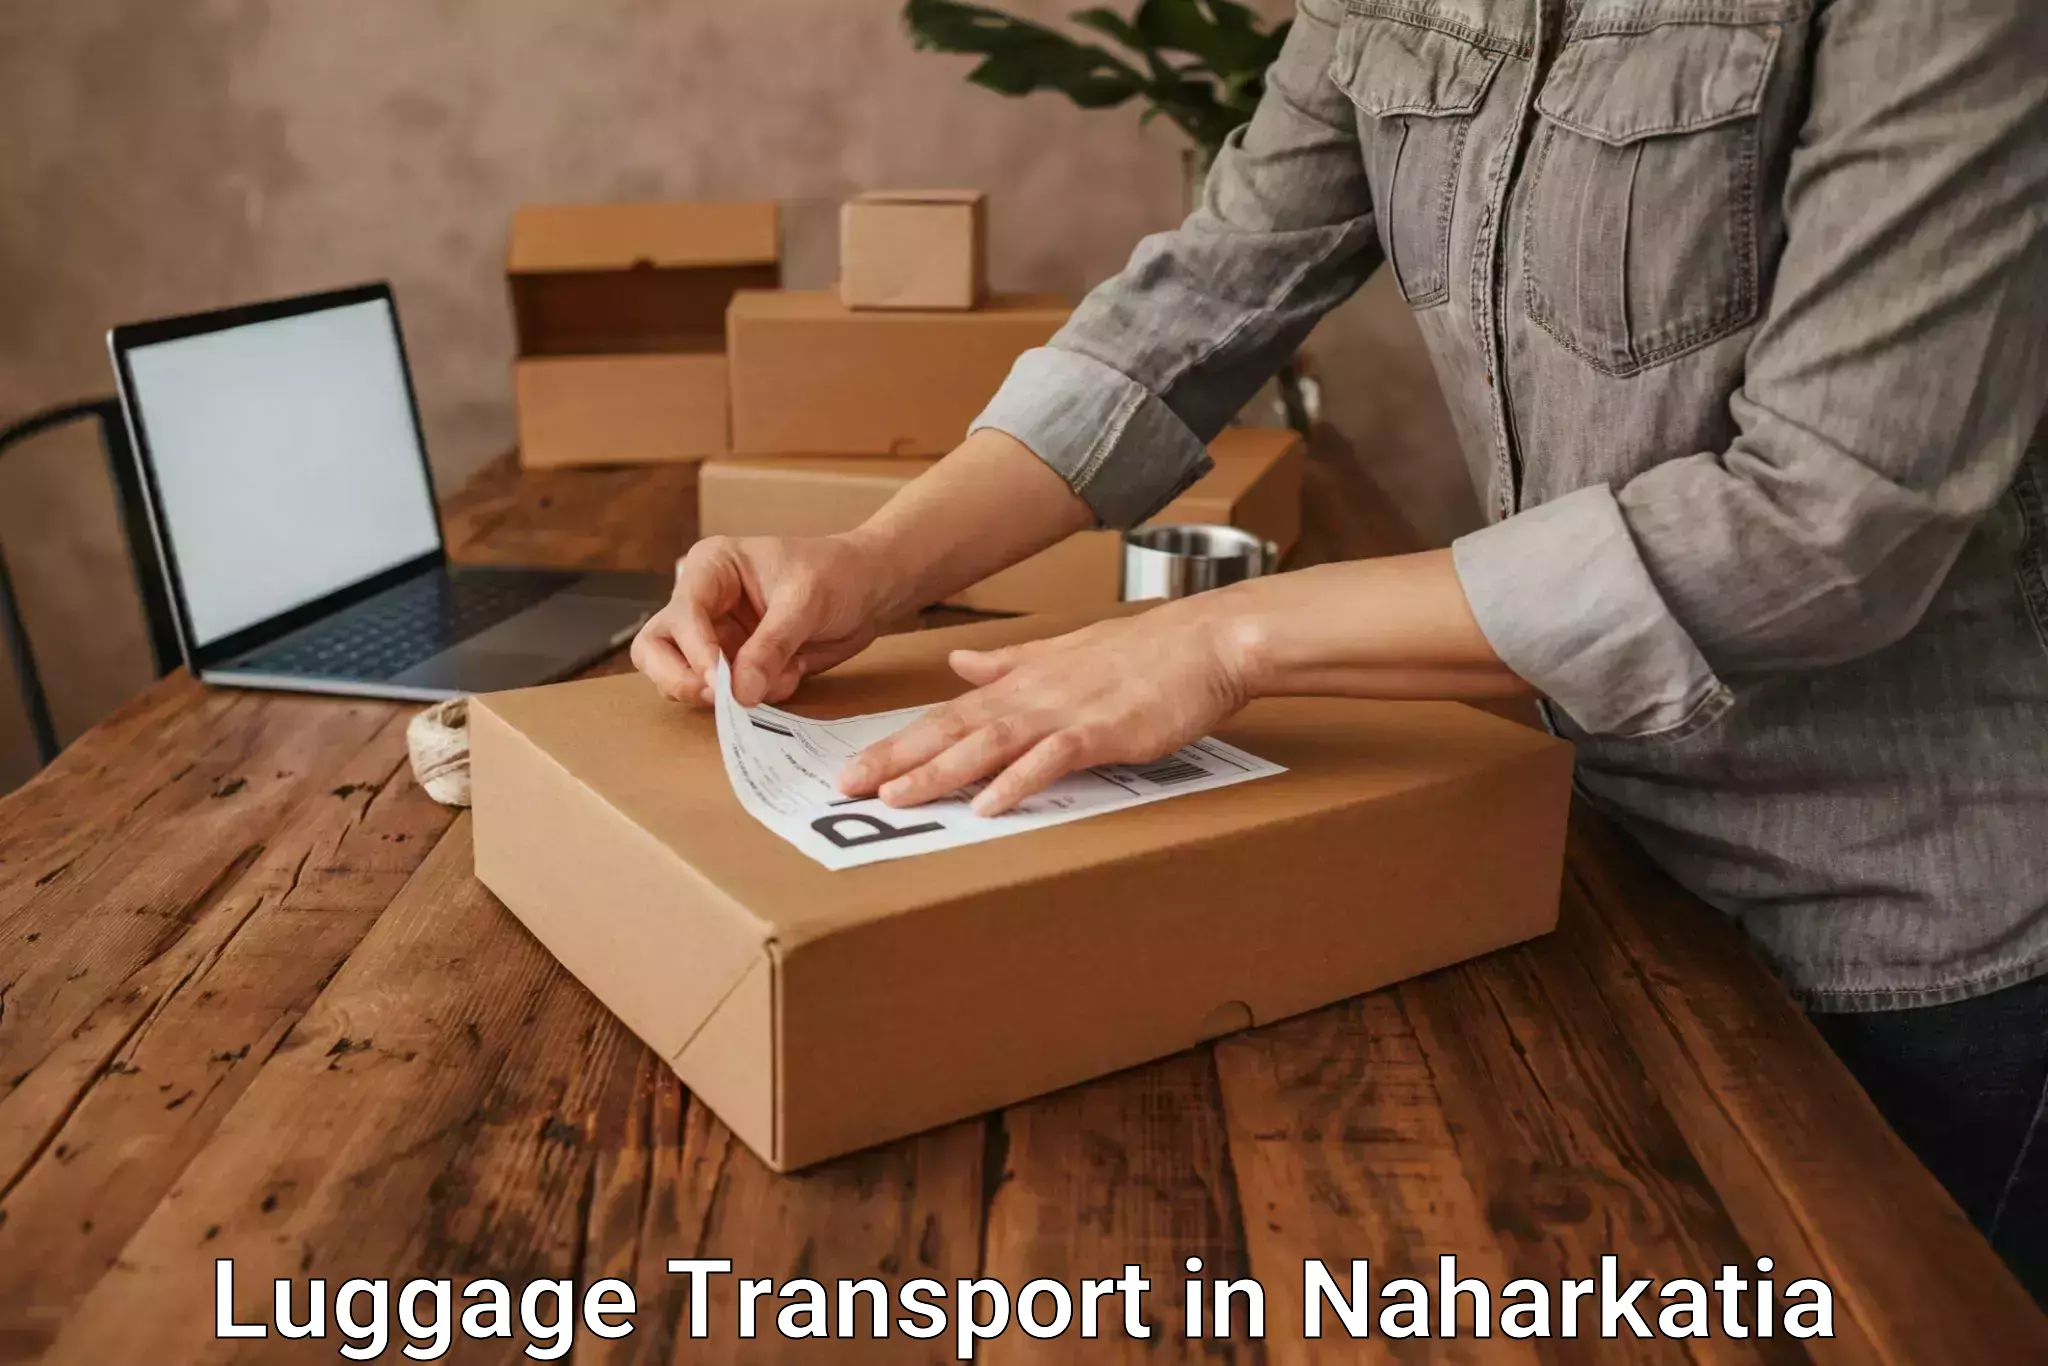 Baggage transport technology in Naharkatia